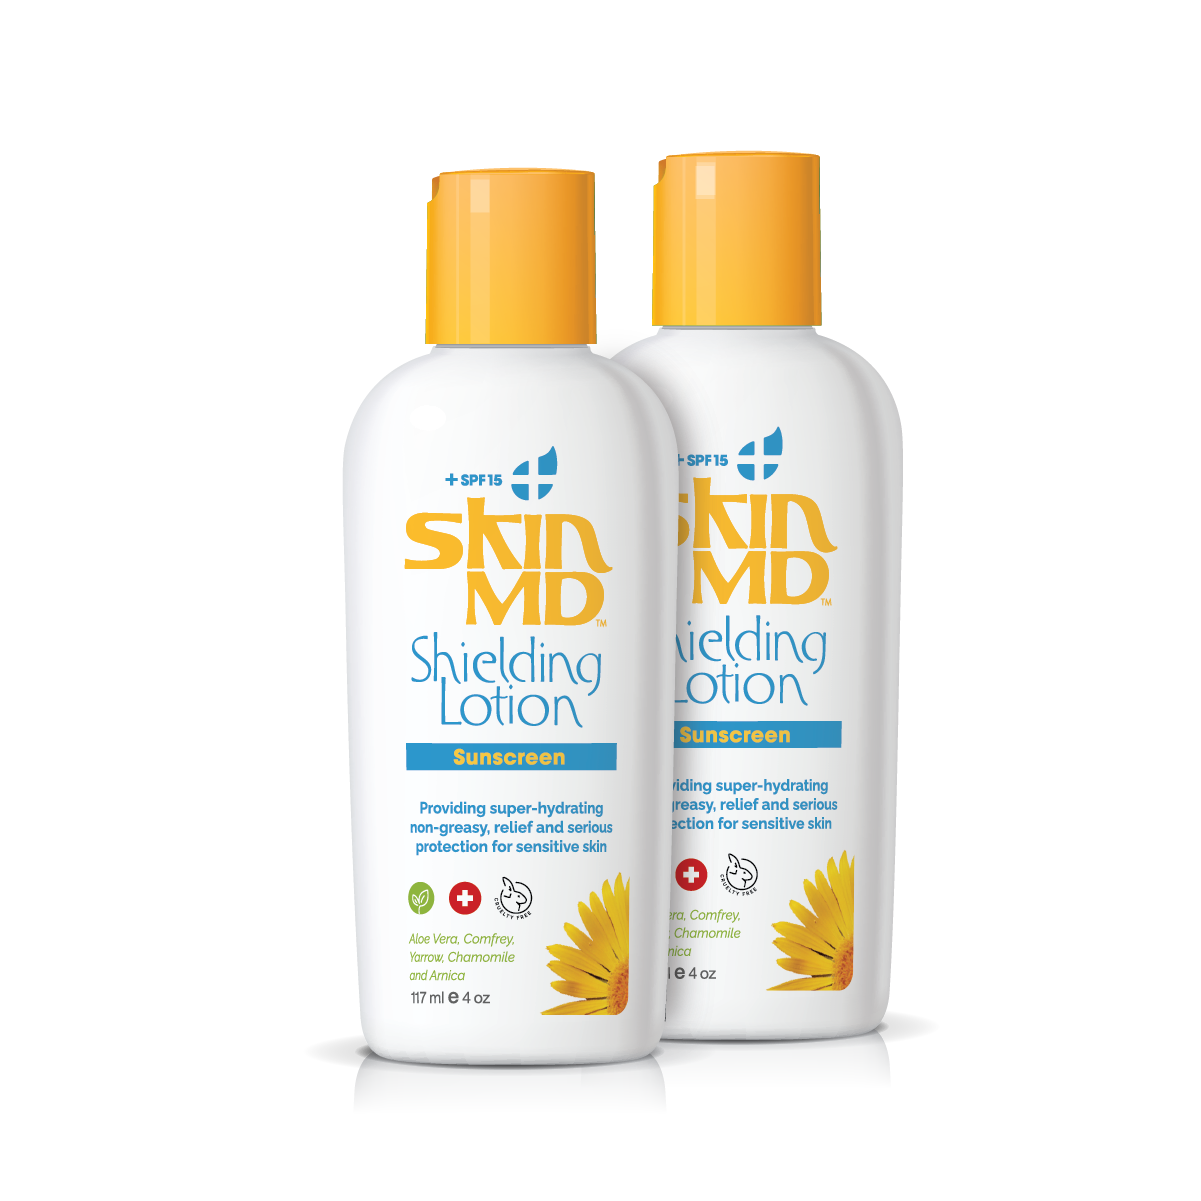 Skin MD Shielding Lotion Sunscreen with SPF 15 4oz (2 Pack)